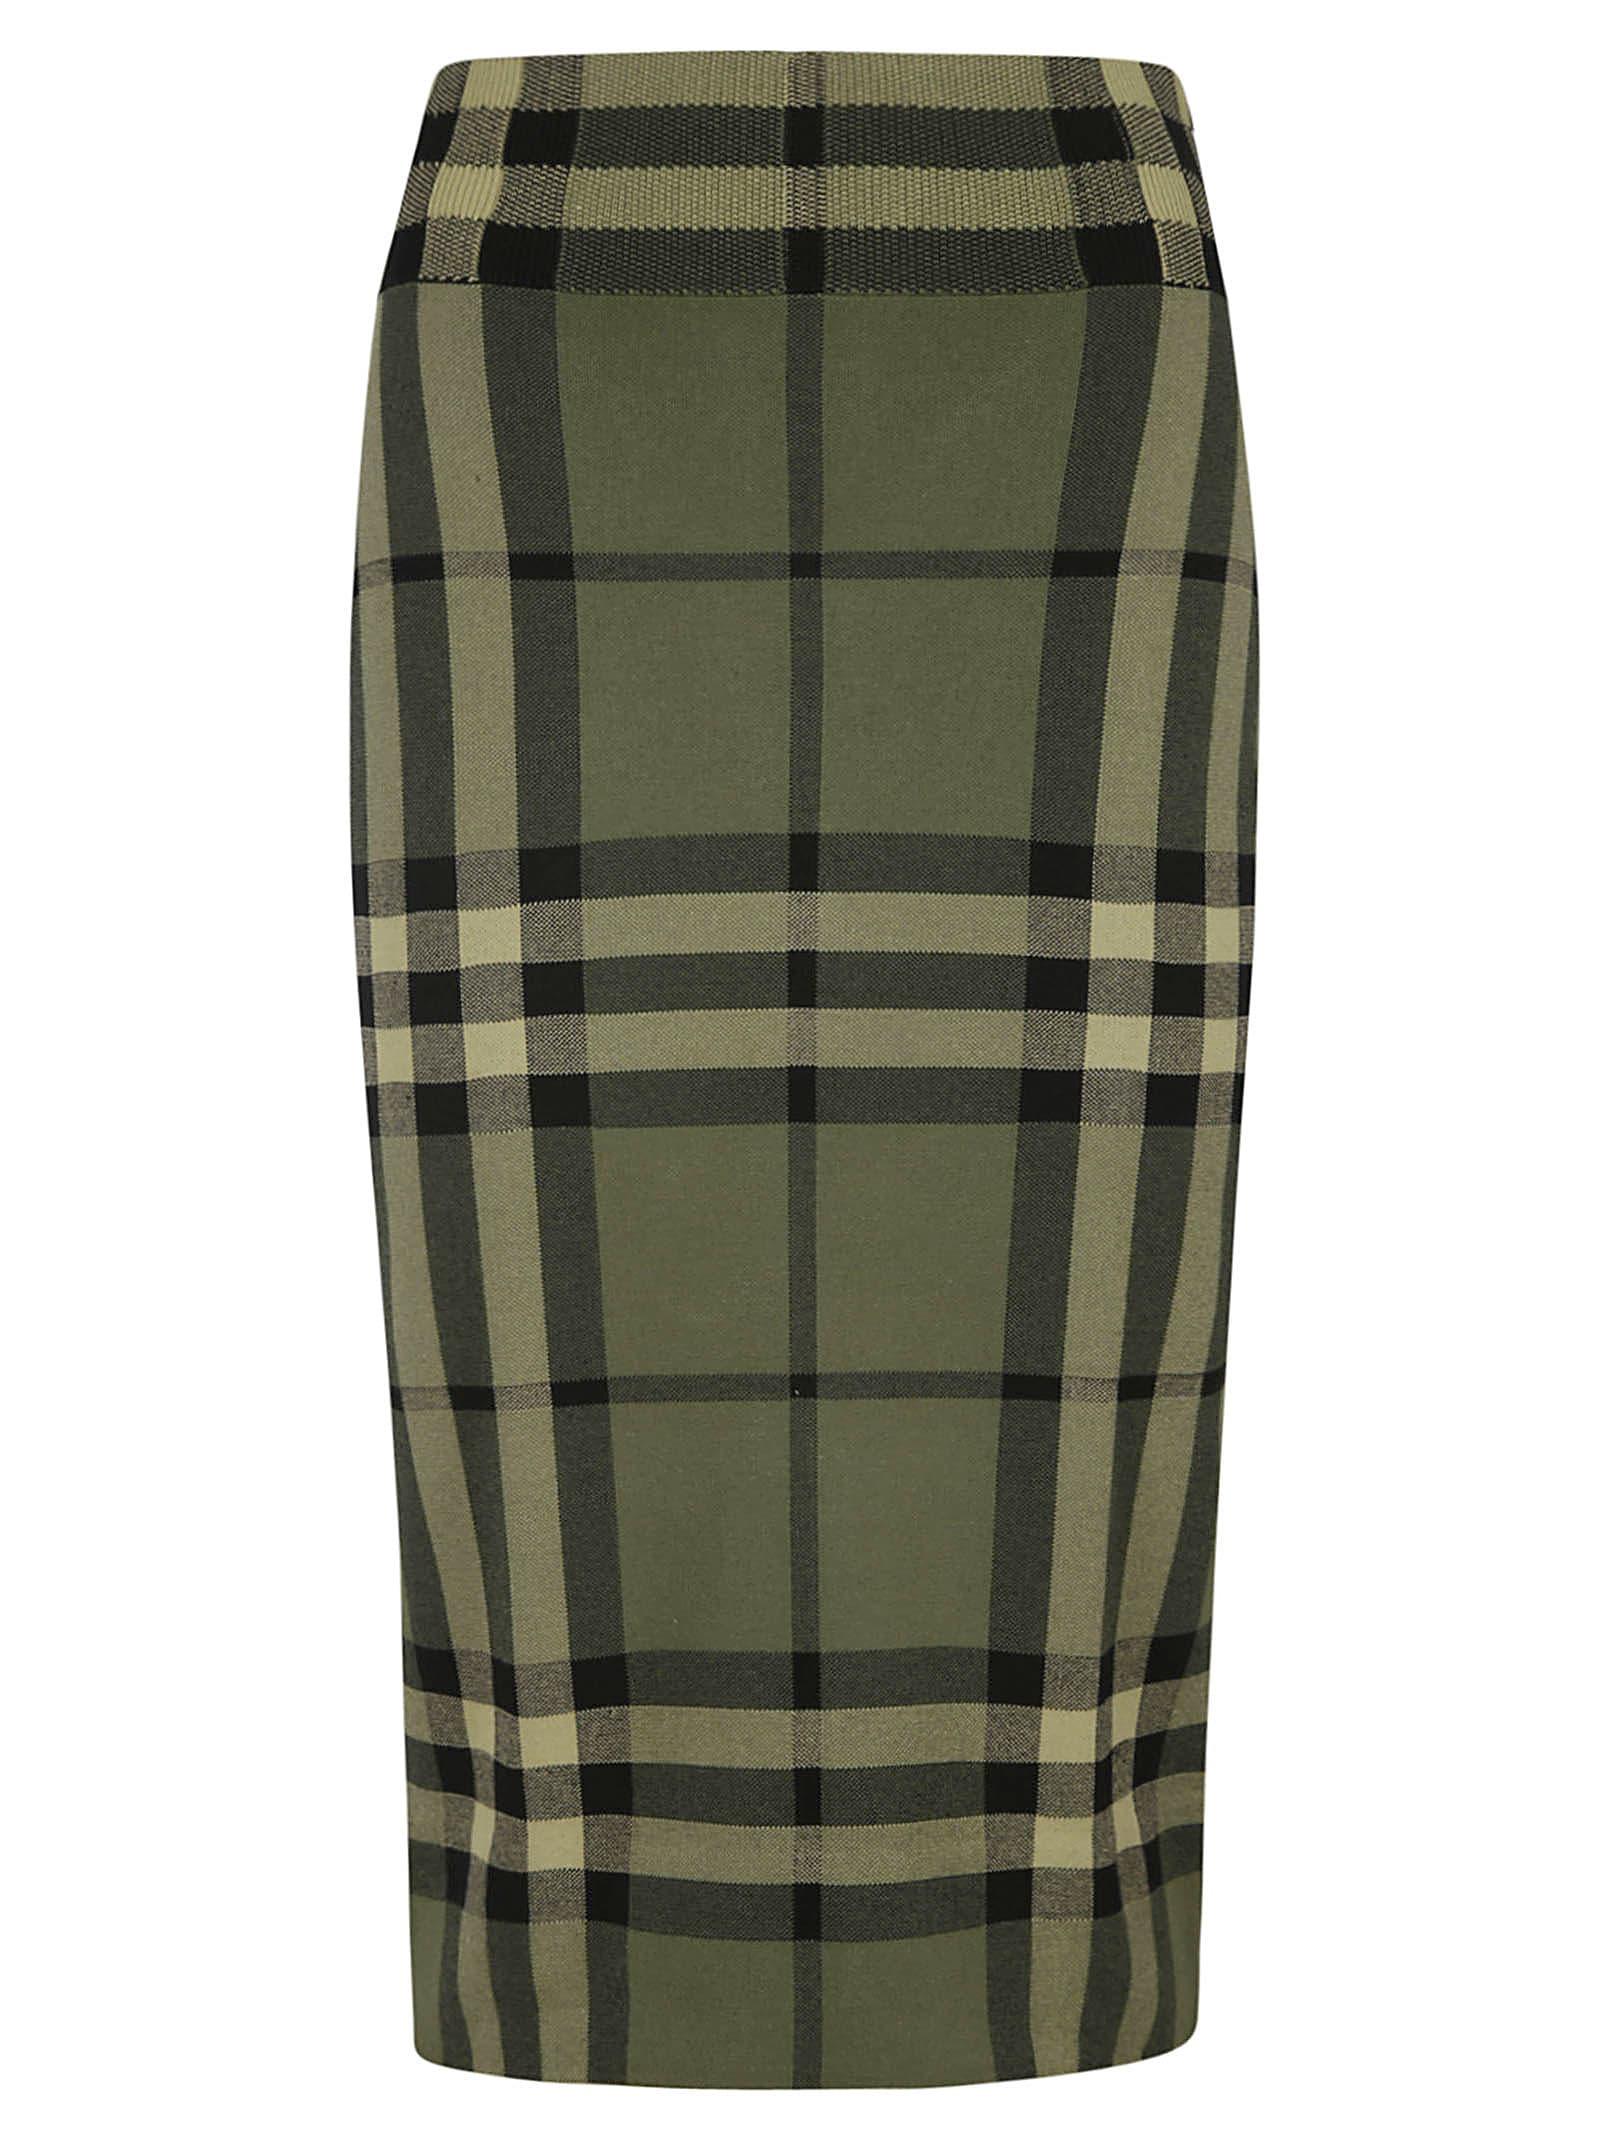 Burberry Cotton Kammie Check Skirt in Military Green (Green) | Lyst